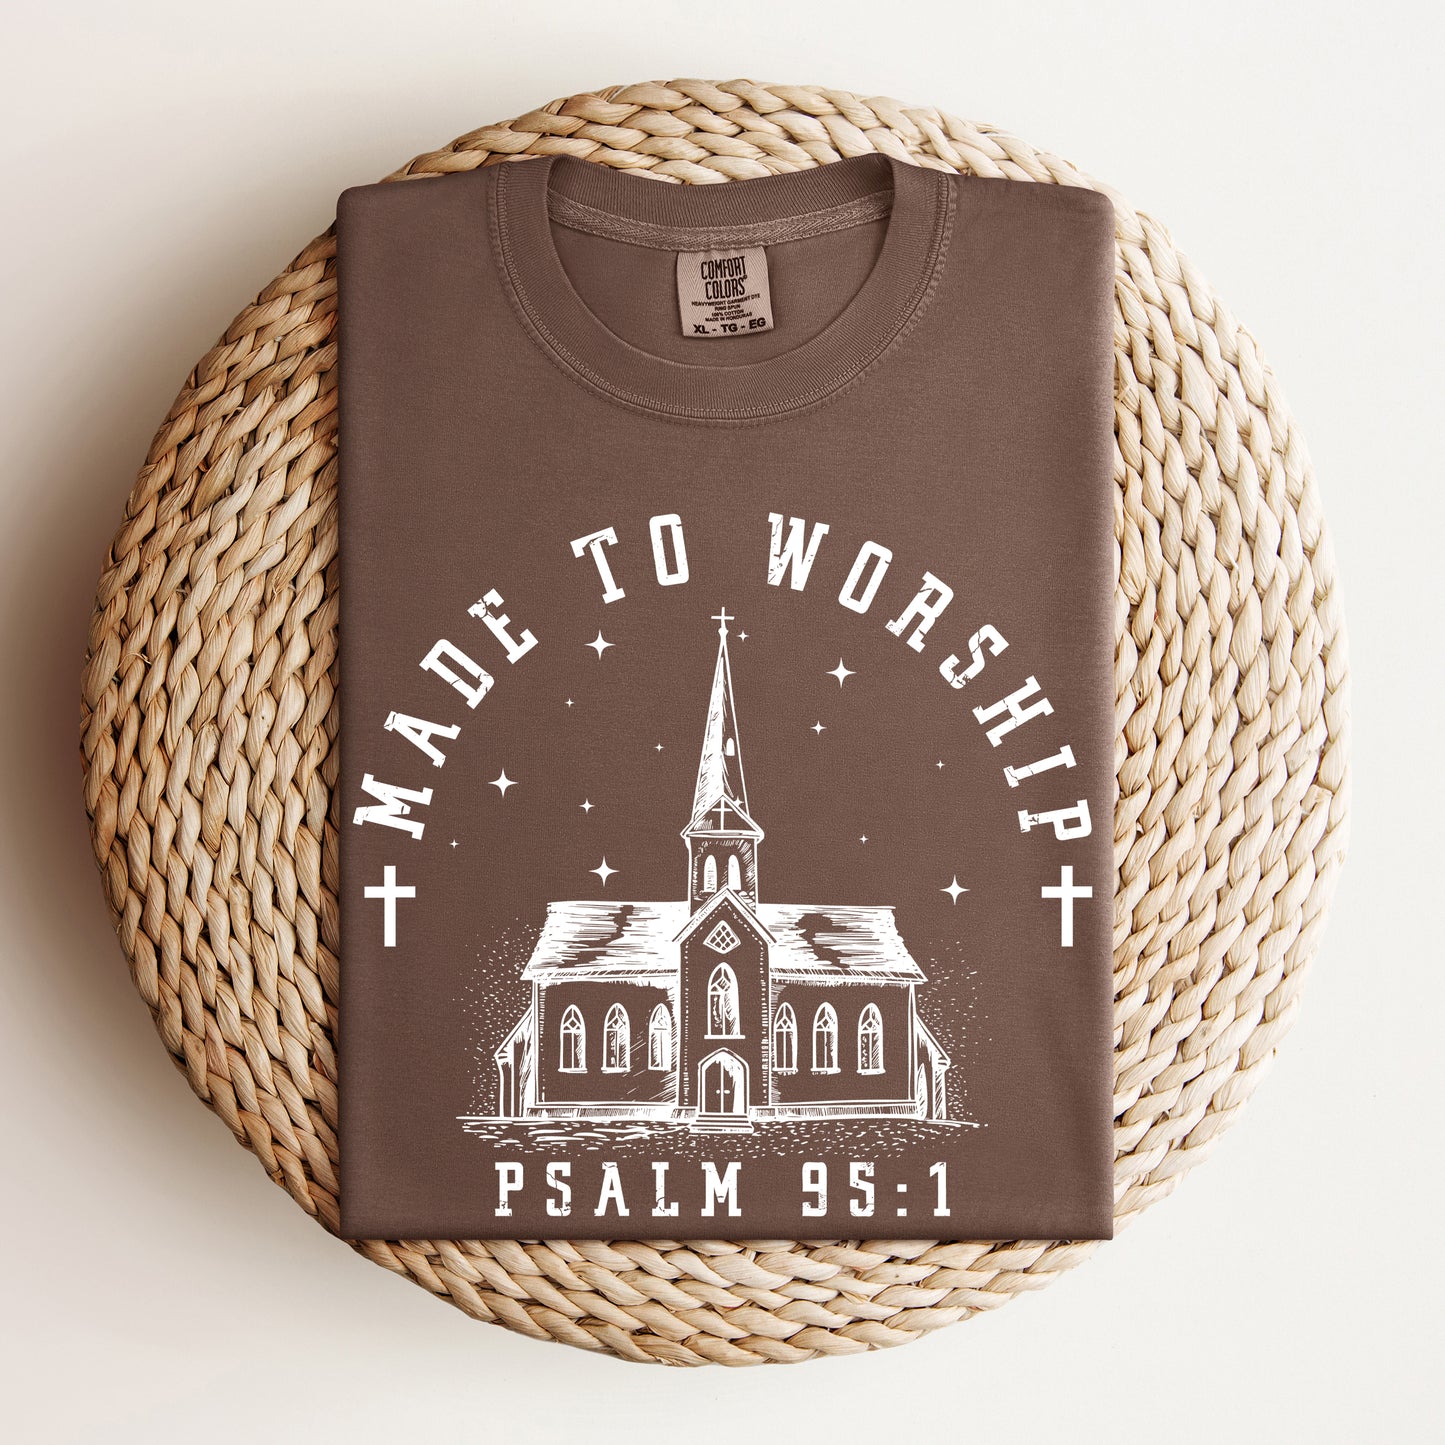 Made To Worship Psalm | Garment Dyed Tee